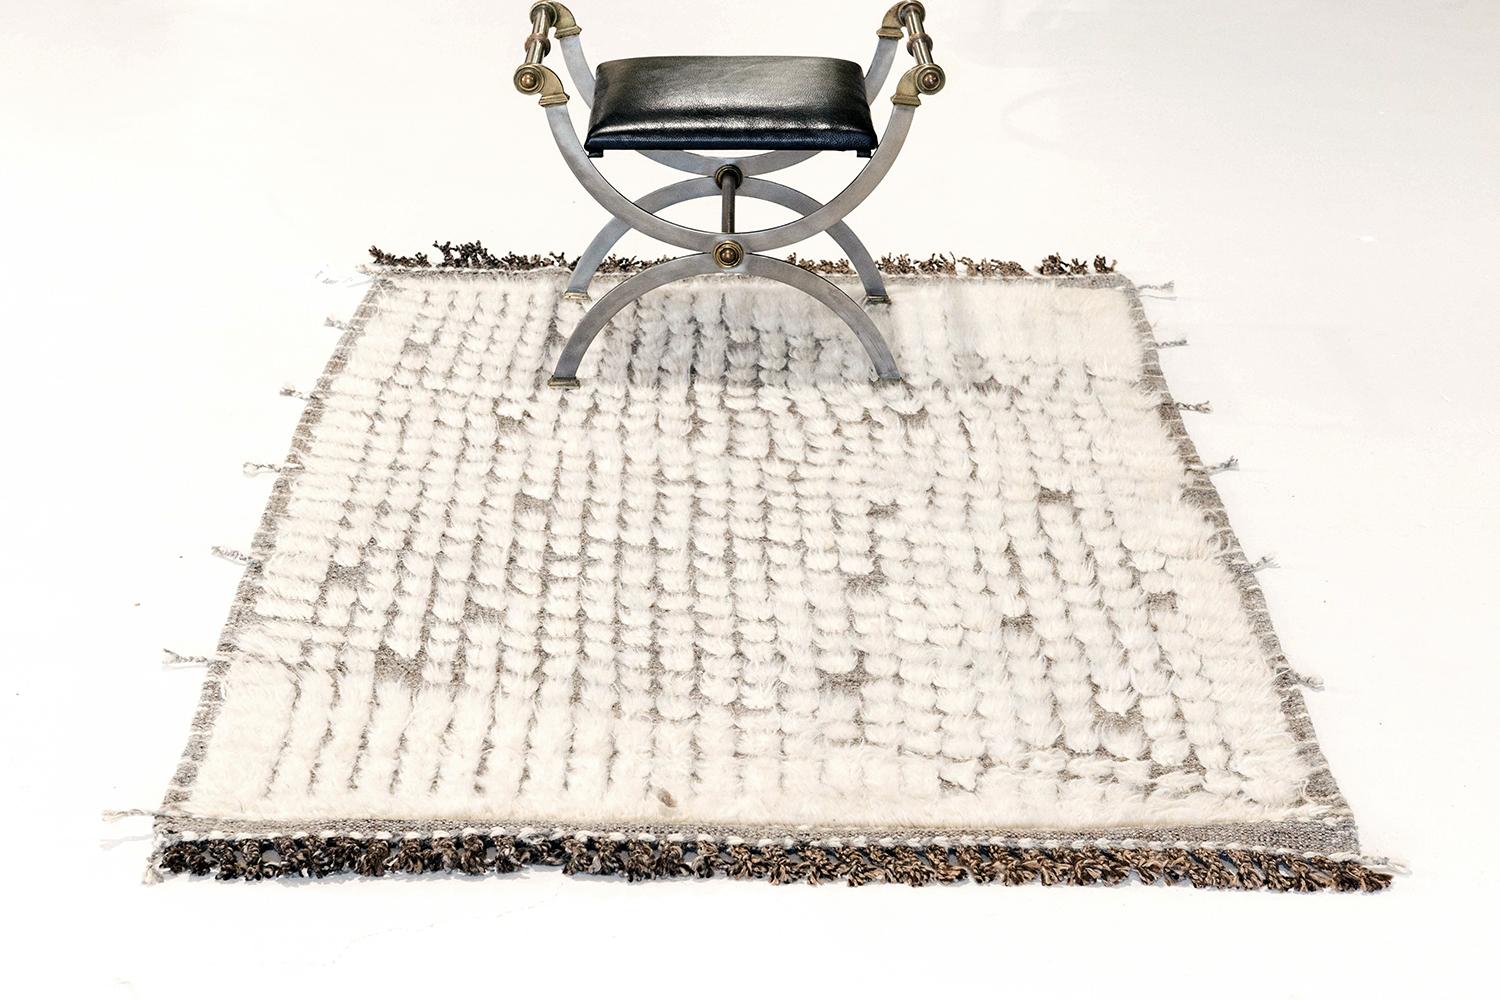 Abisko' is the perfect handwoven rug with embossed detailing and an all over repeating diagonal pattern in white atop a natural gray pile weave. Beautiful tassels and bordered designs add a timely and one of a kind essence. Haute Bohemian